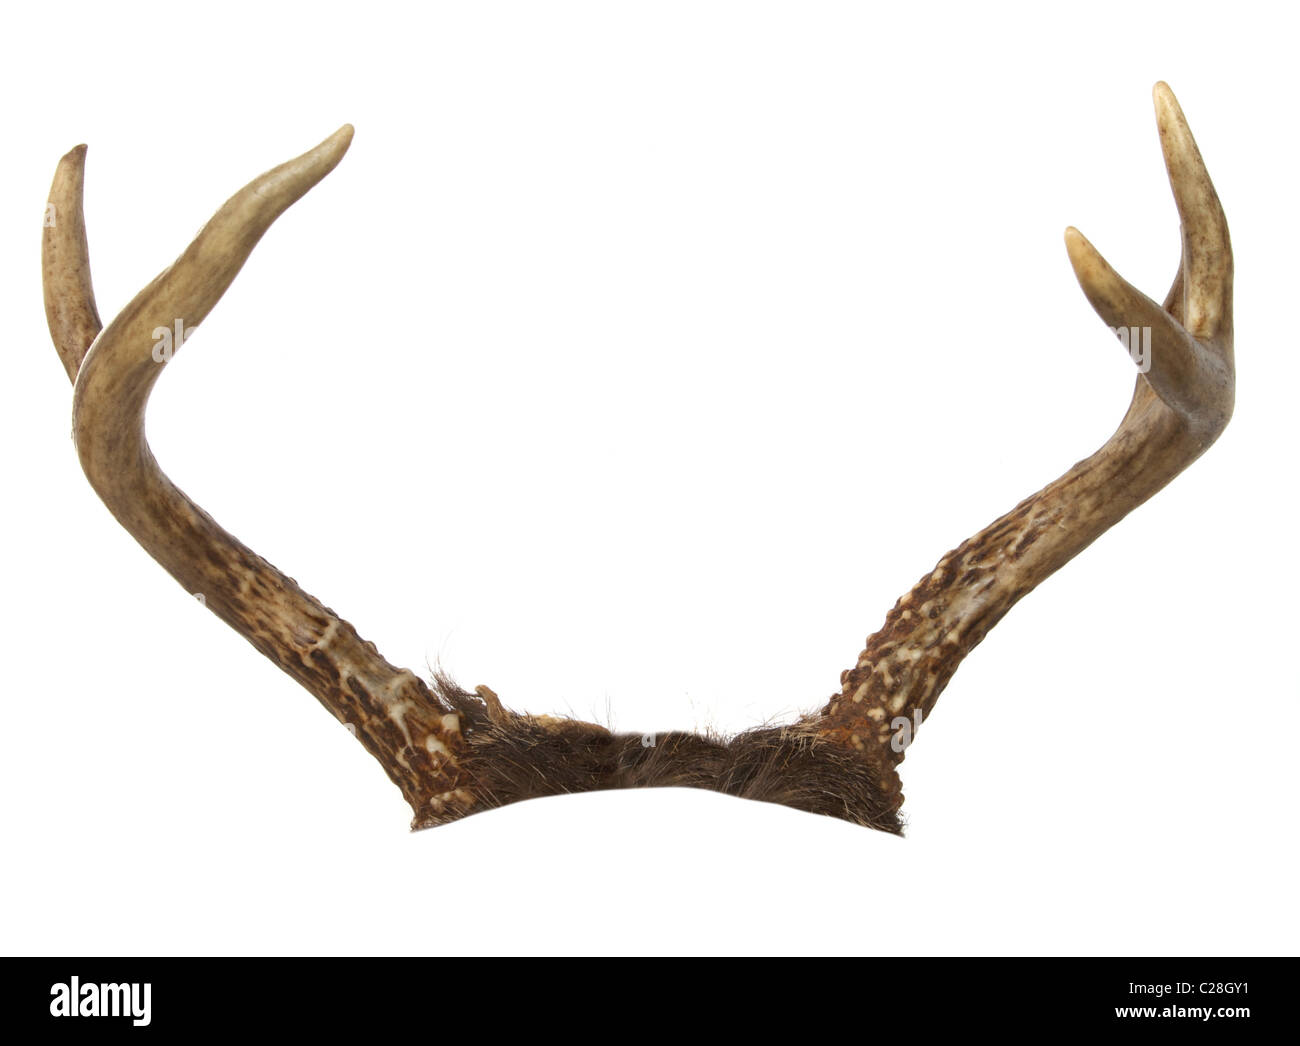 Forked antlers from a whitetail deer isolated on white. Cropped so they can be placed on an another animal. Stock Photo